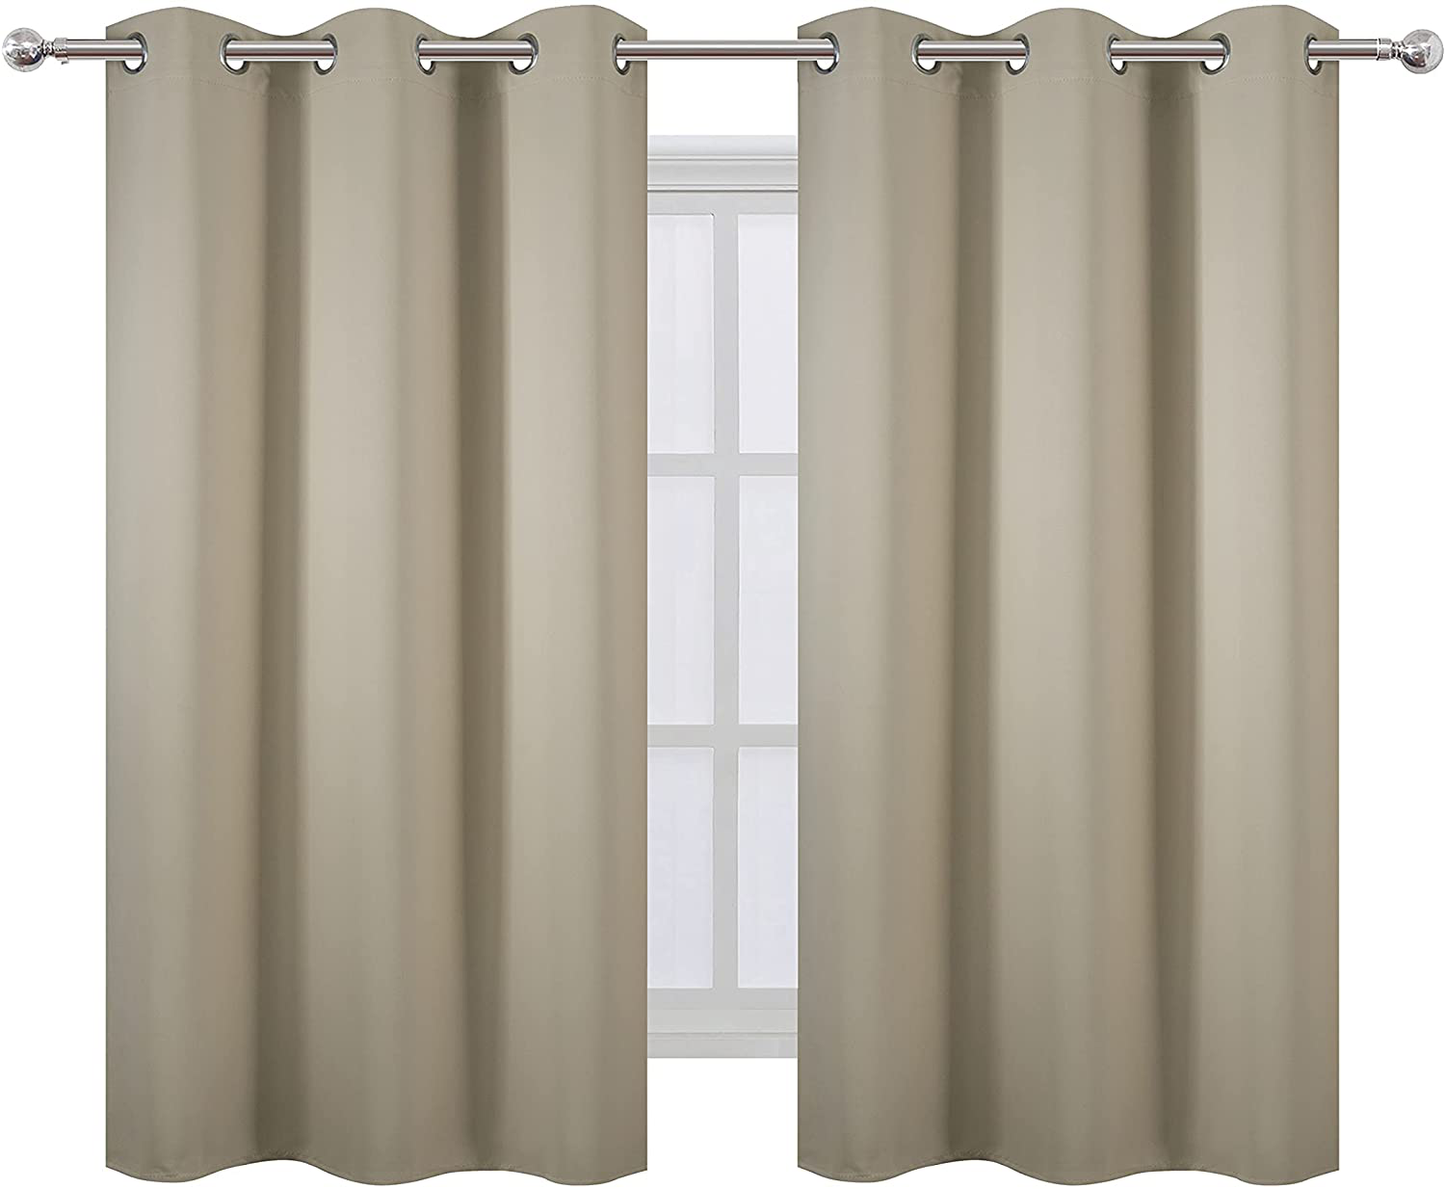 LEMOMO Cappuccino Thermal Blackout Curtains/52 x 108 Inch/Set of 2 Panels Room Darkening Curtains for Bedroom